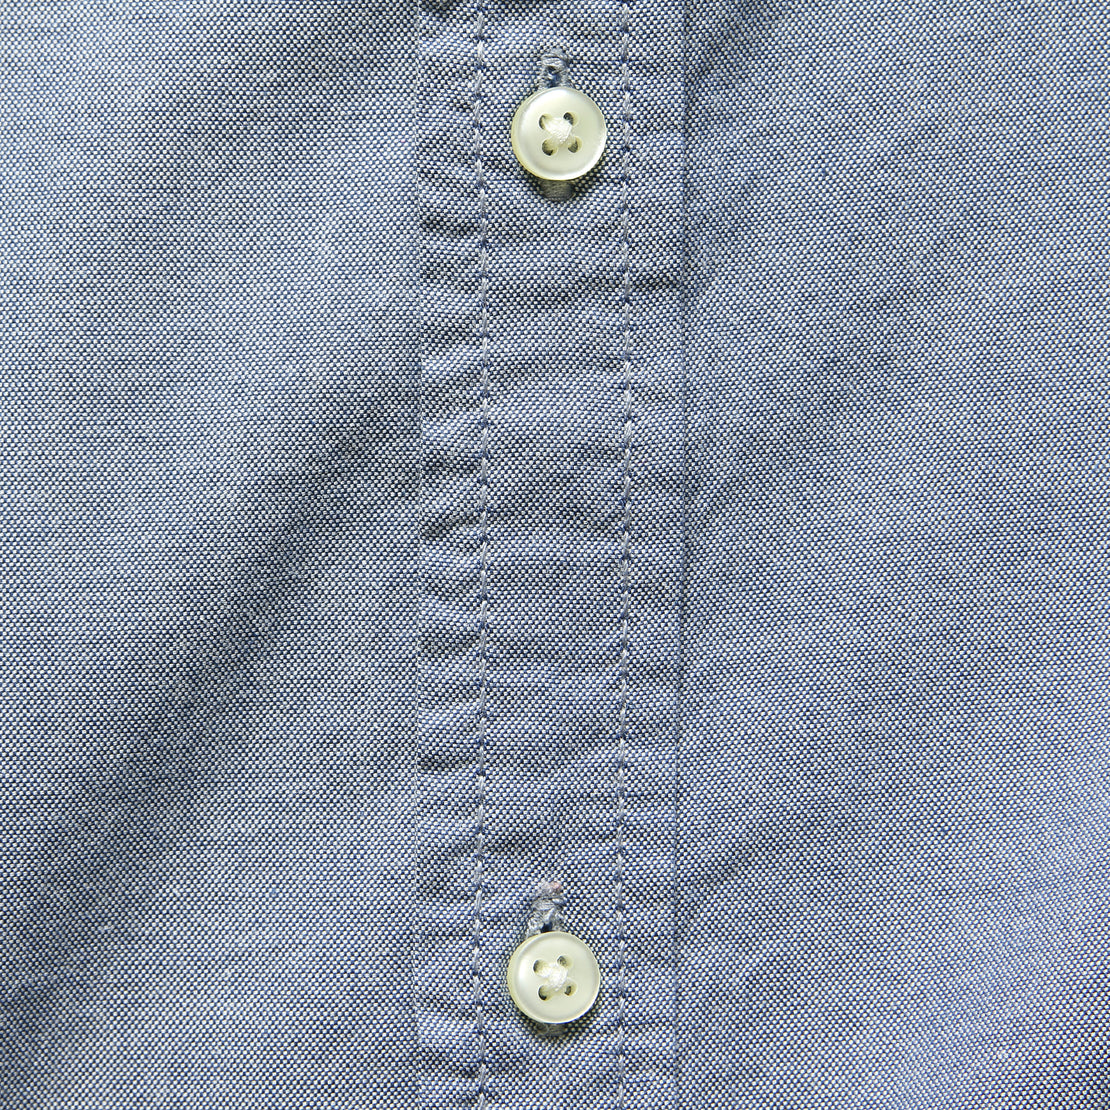 Oxford Shirt - Blue Agave - Life After Denim - STAG Provisions - Tops - S/S Woven - Solid